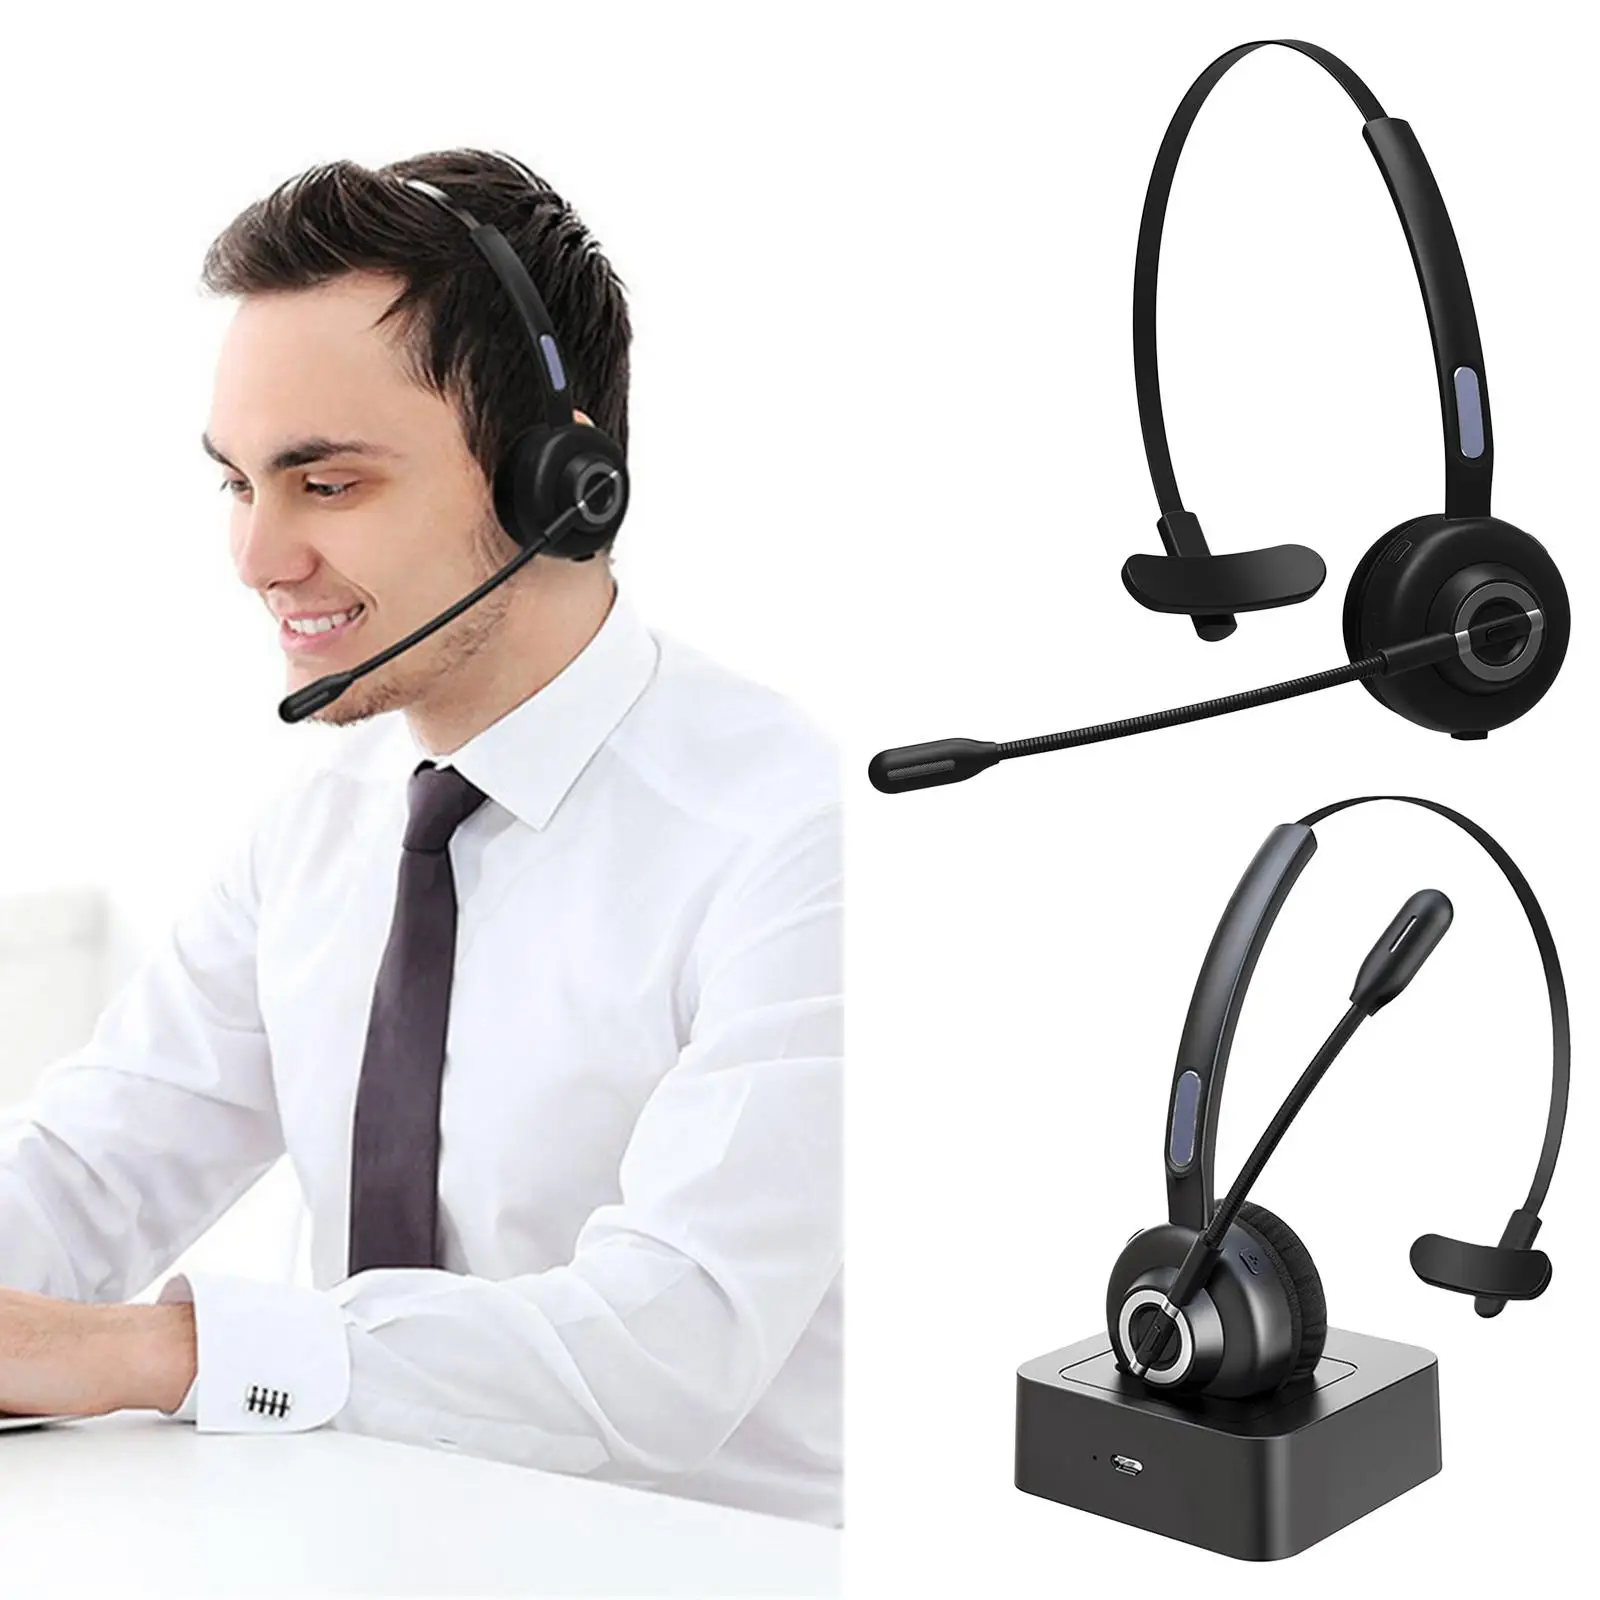  Headset with Microphone, Headset Noise Cancelling Mic, Hands- Headphones for PC Laptop Call Center